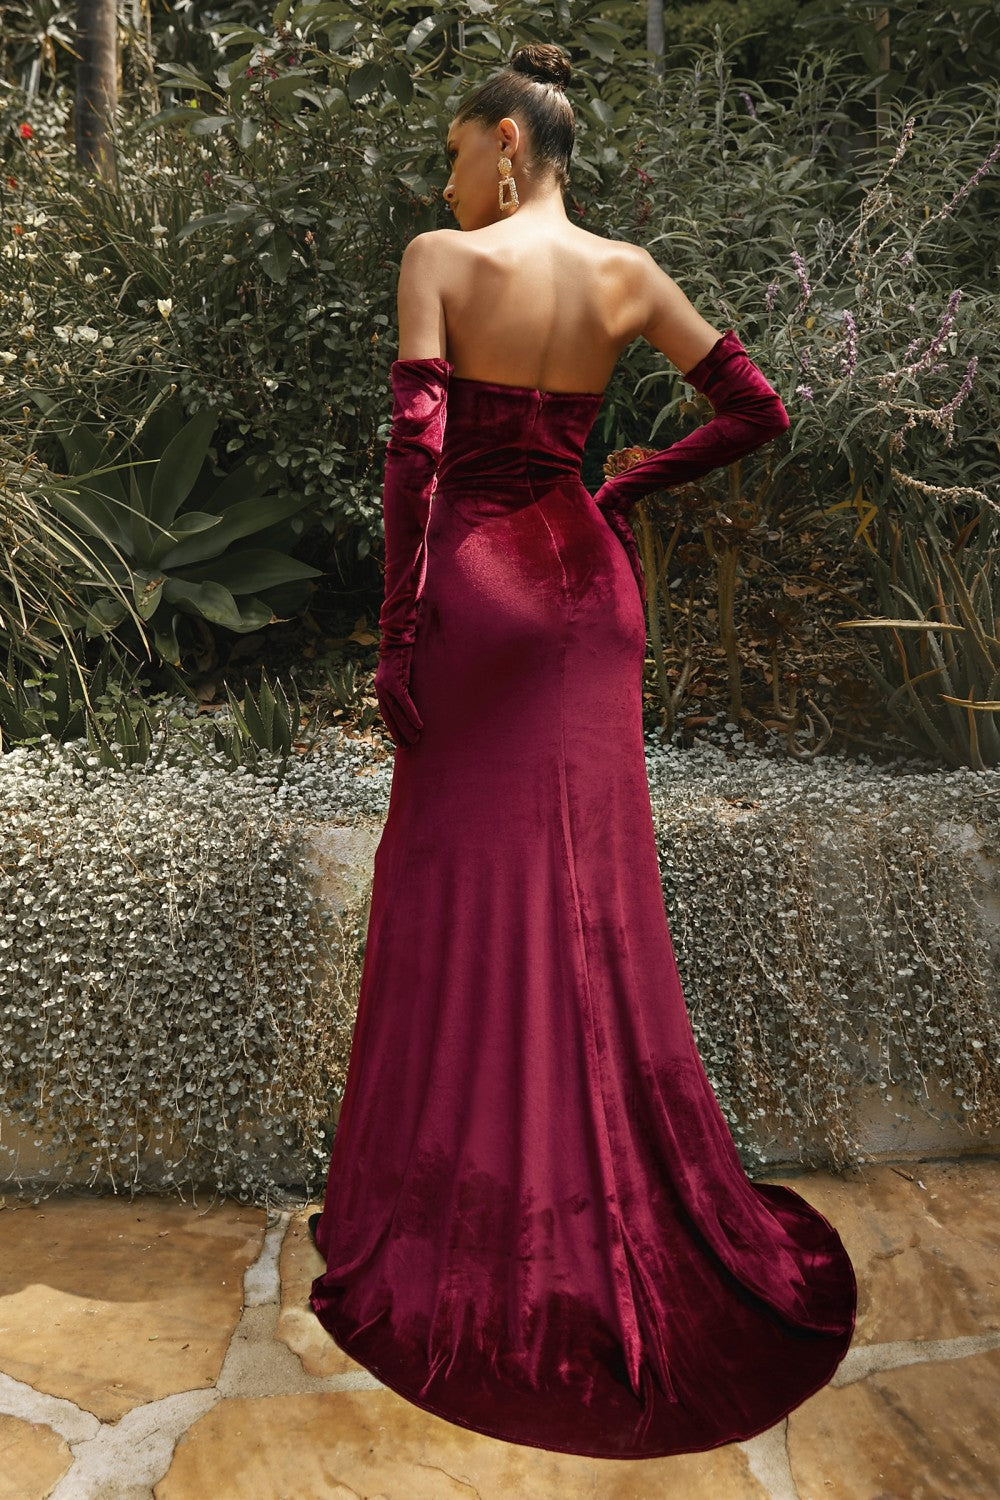 A vintage take on classic glamour, Ch176 captures the feel of old Hollywood with the refreshing energy of the modern era. This luxe design features a corset-inspired bodice with a mermaid skirt in velvet fabrication. Adorned with jewel tones, it comes with detachable gloves for a versatile and dramatic appeal.